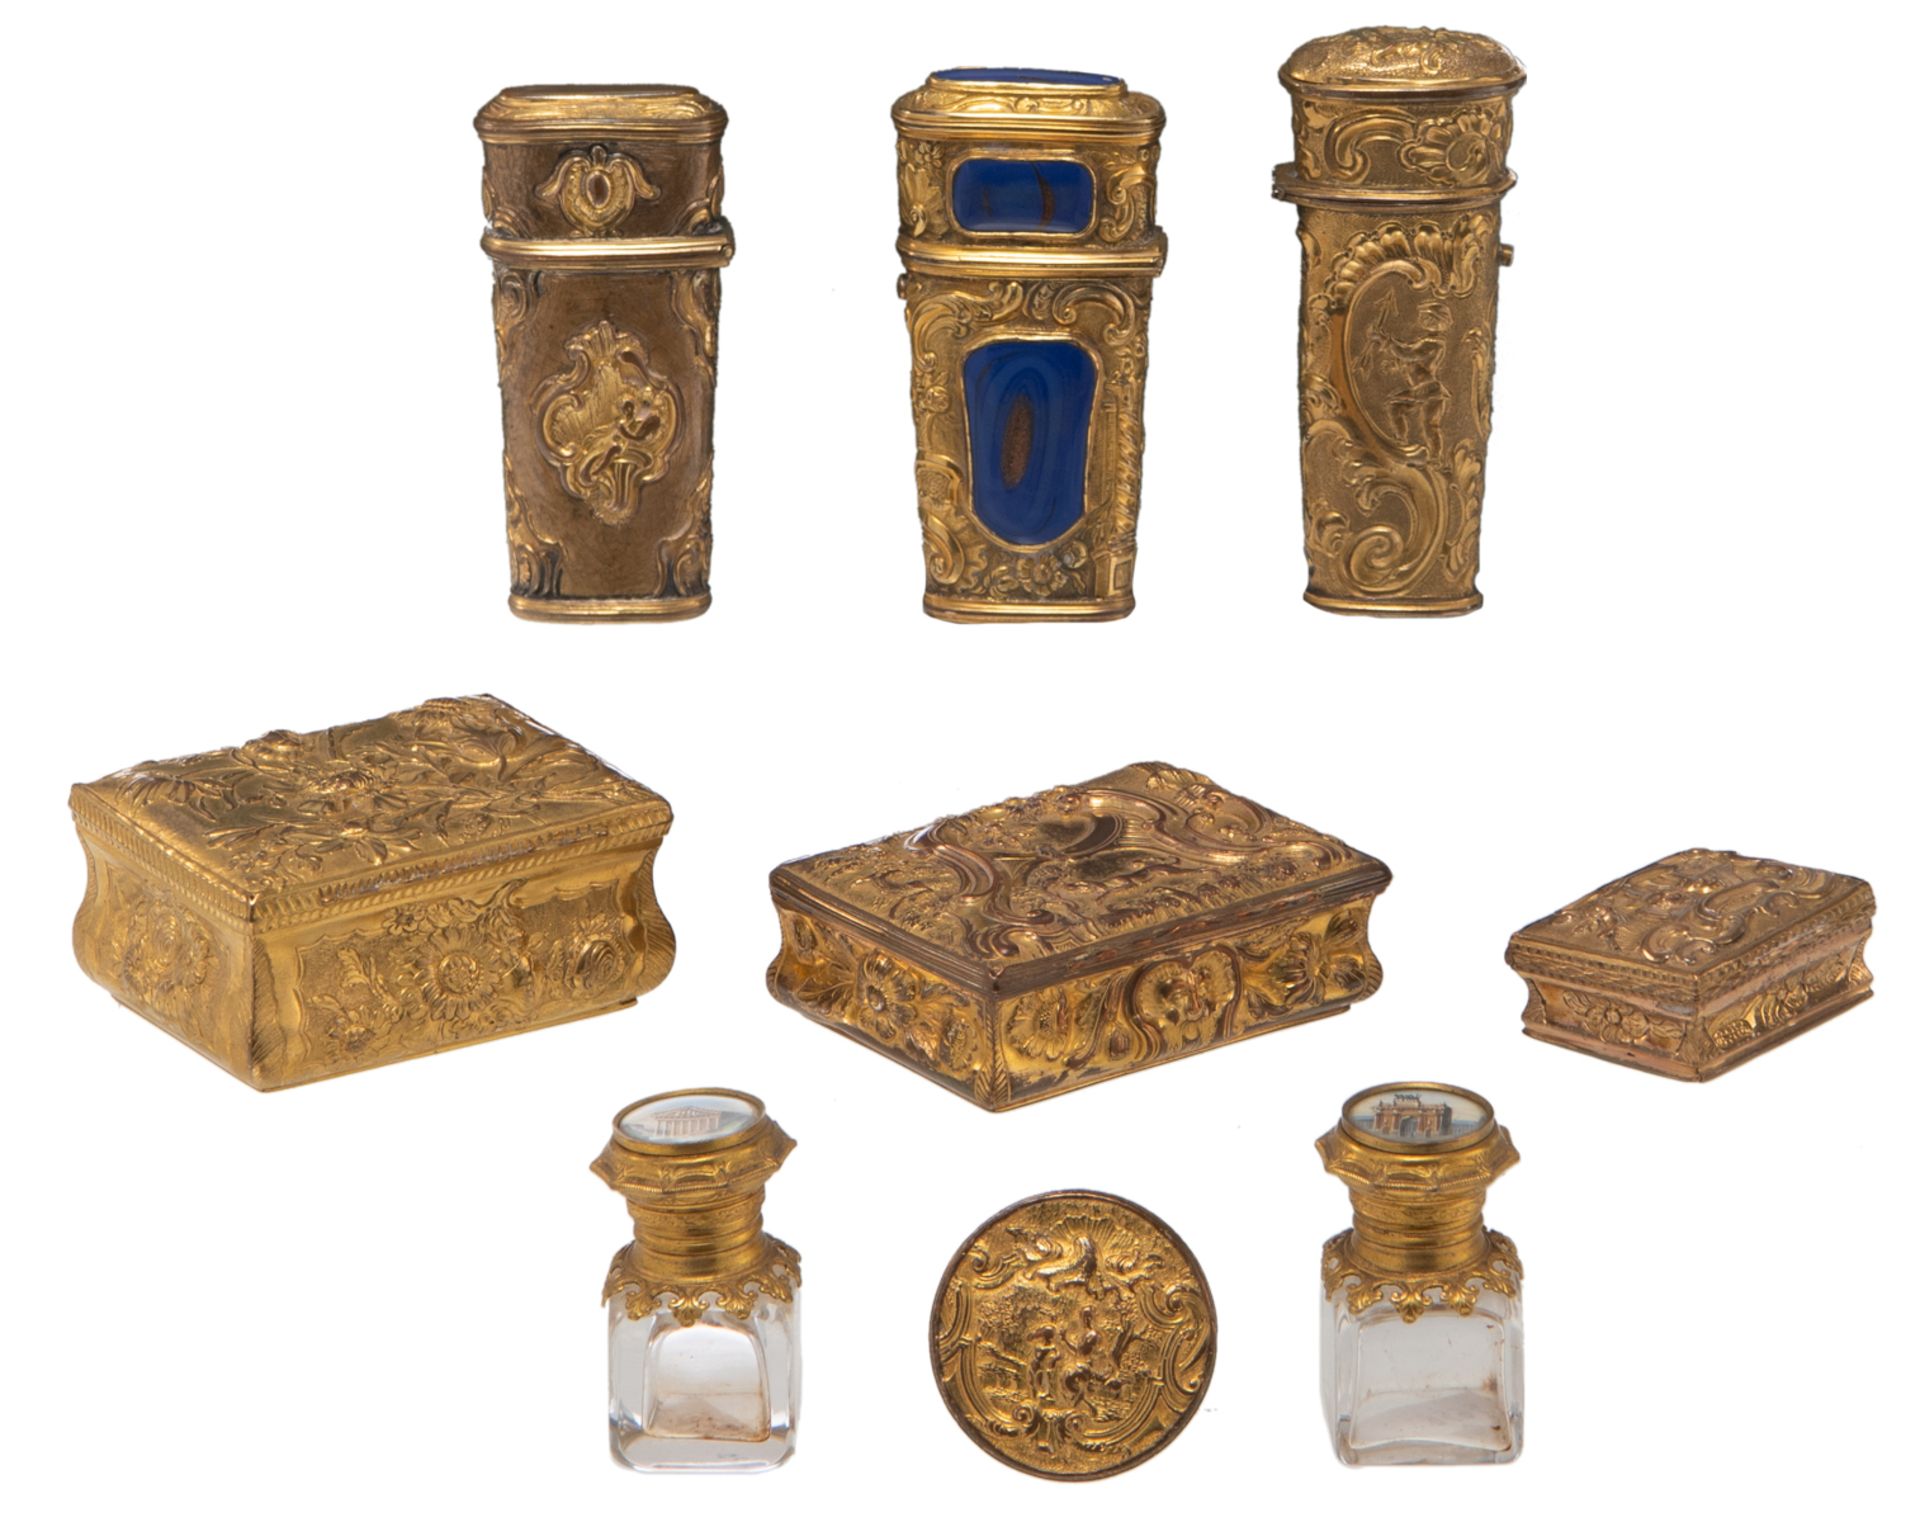 A charming lot of various objets de vertu, all made out of relief decorated gilt brass, added two so